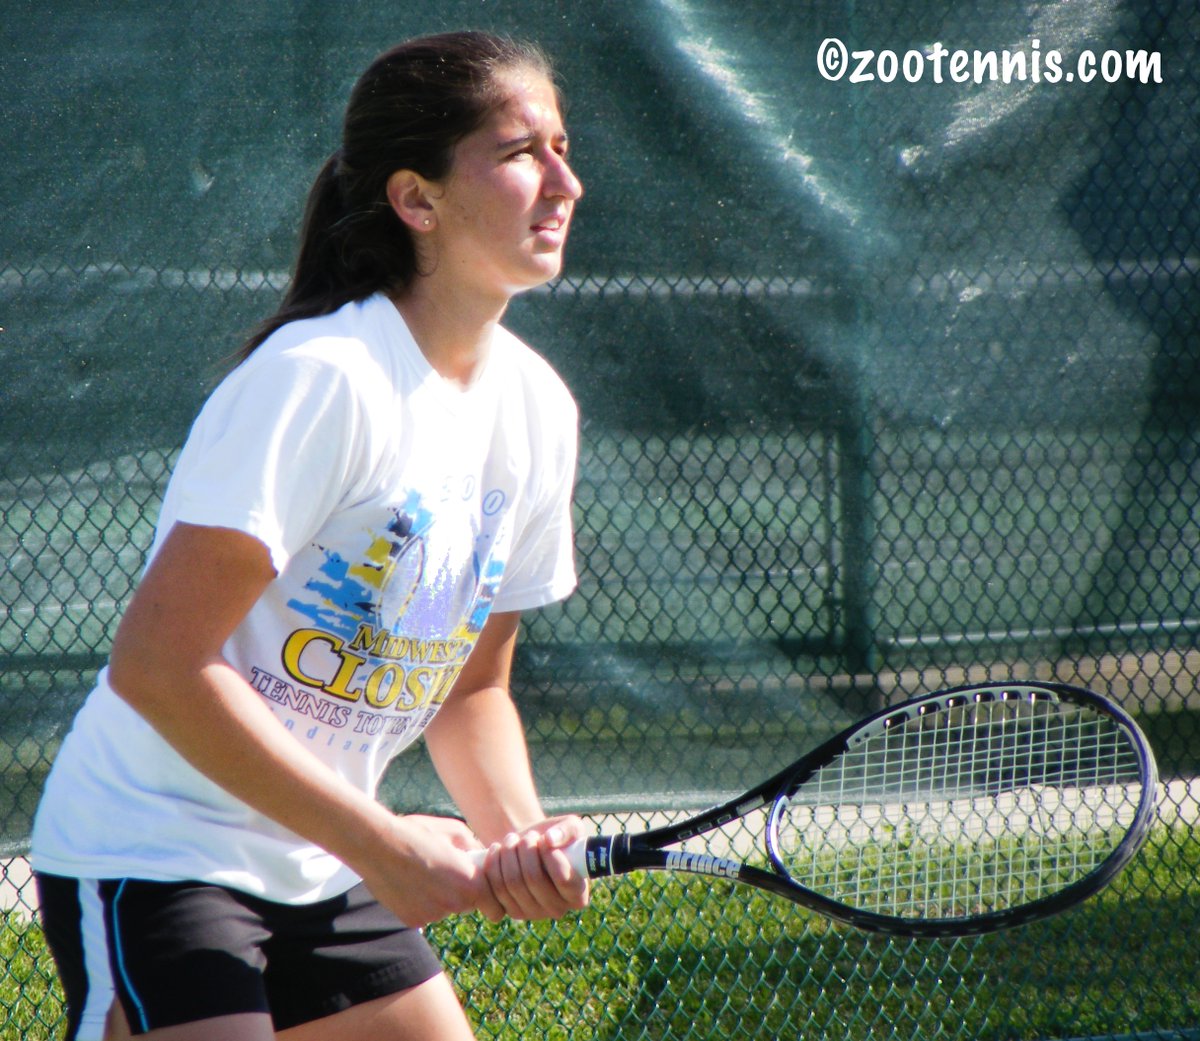 Today's #tbt goes back nearly half a lifetime for Emina Bektas, who will be well inside WTA Top 100 for 1st time on Monday, at age 30. She was 15 in this photo at 2009 USTA Spring Nats in Mobile. Always a top USTA junior, she went on to All-America career at Michigan: